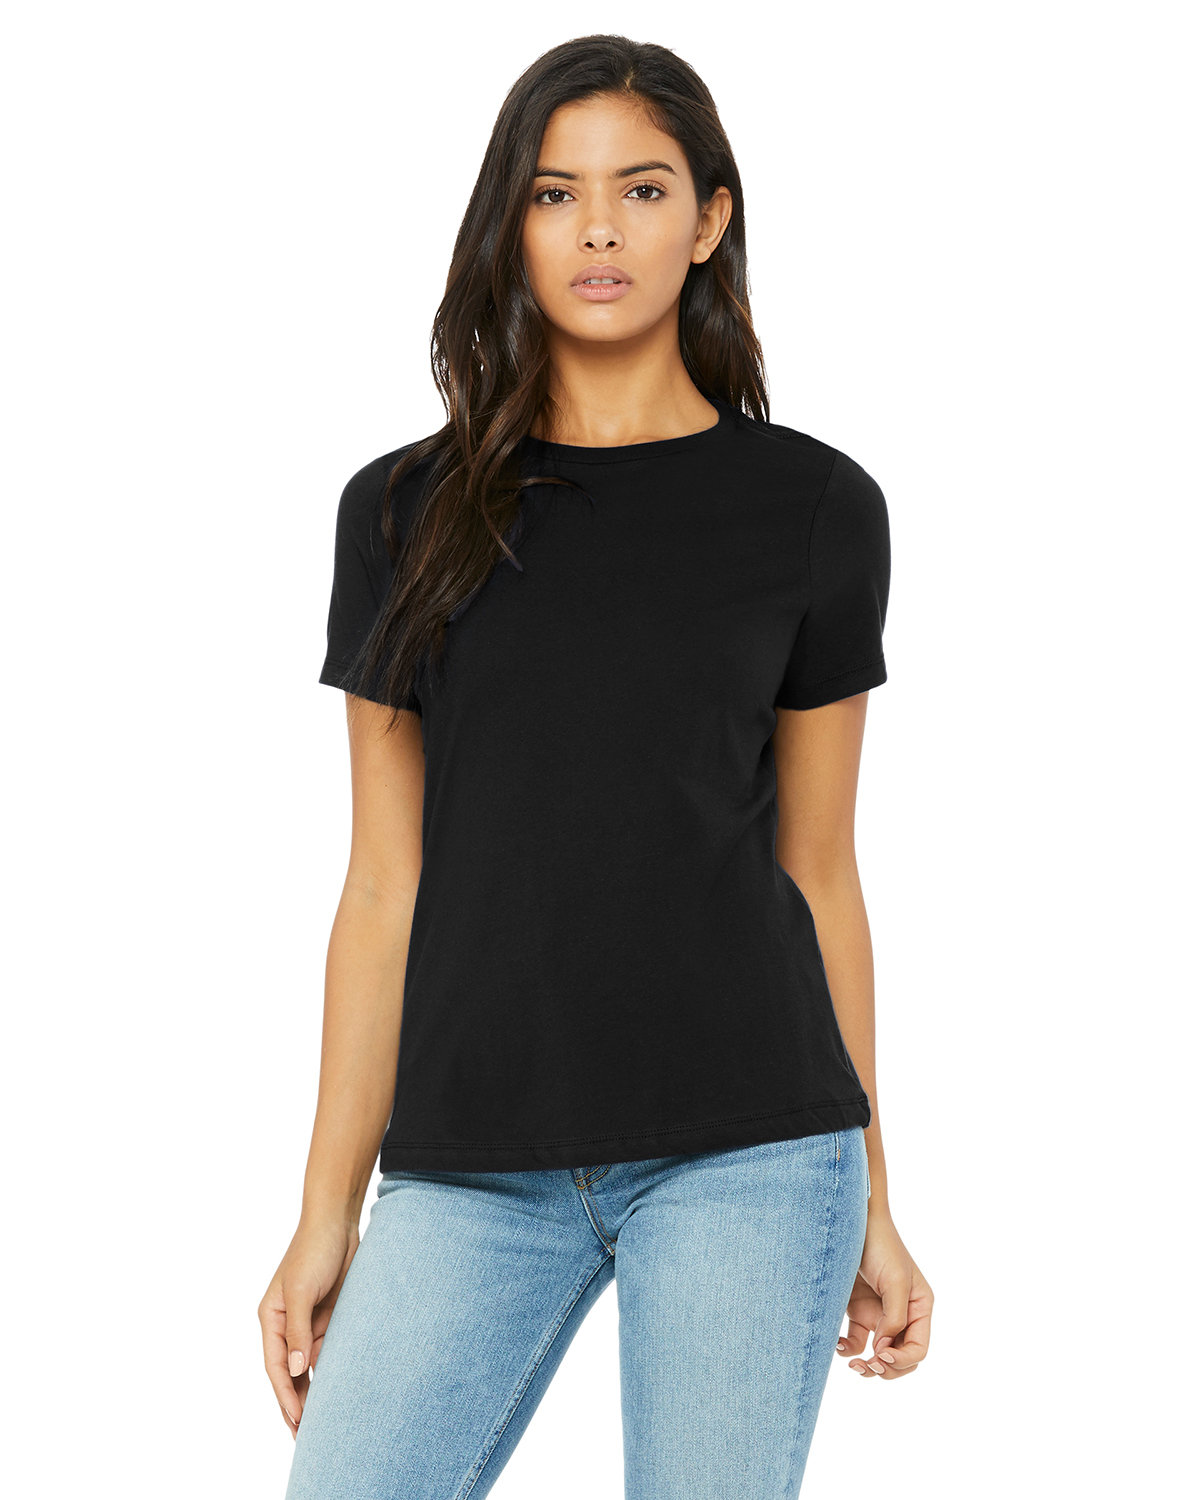 Bella + Canvas Ladies' Relaxed Jersey Short-Sleeve T-Shirt BLACK 